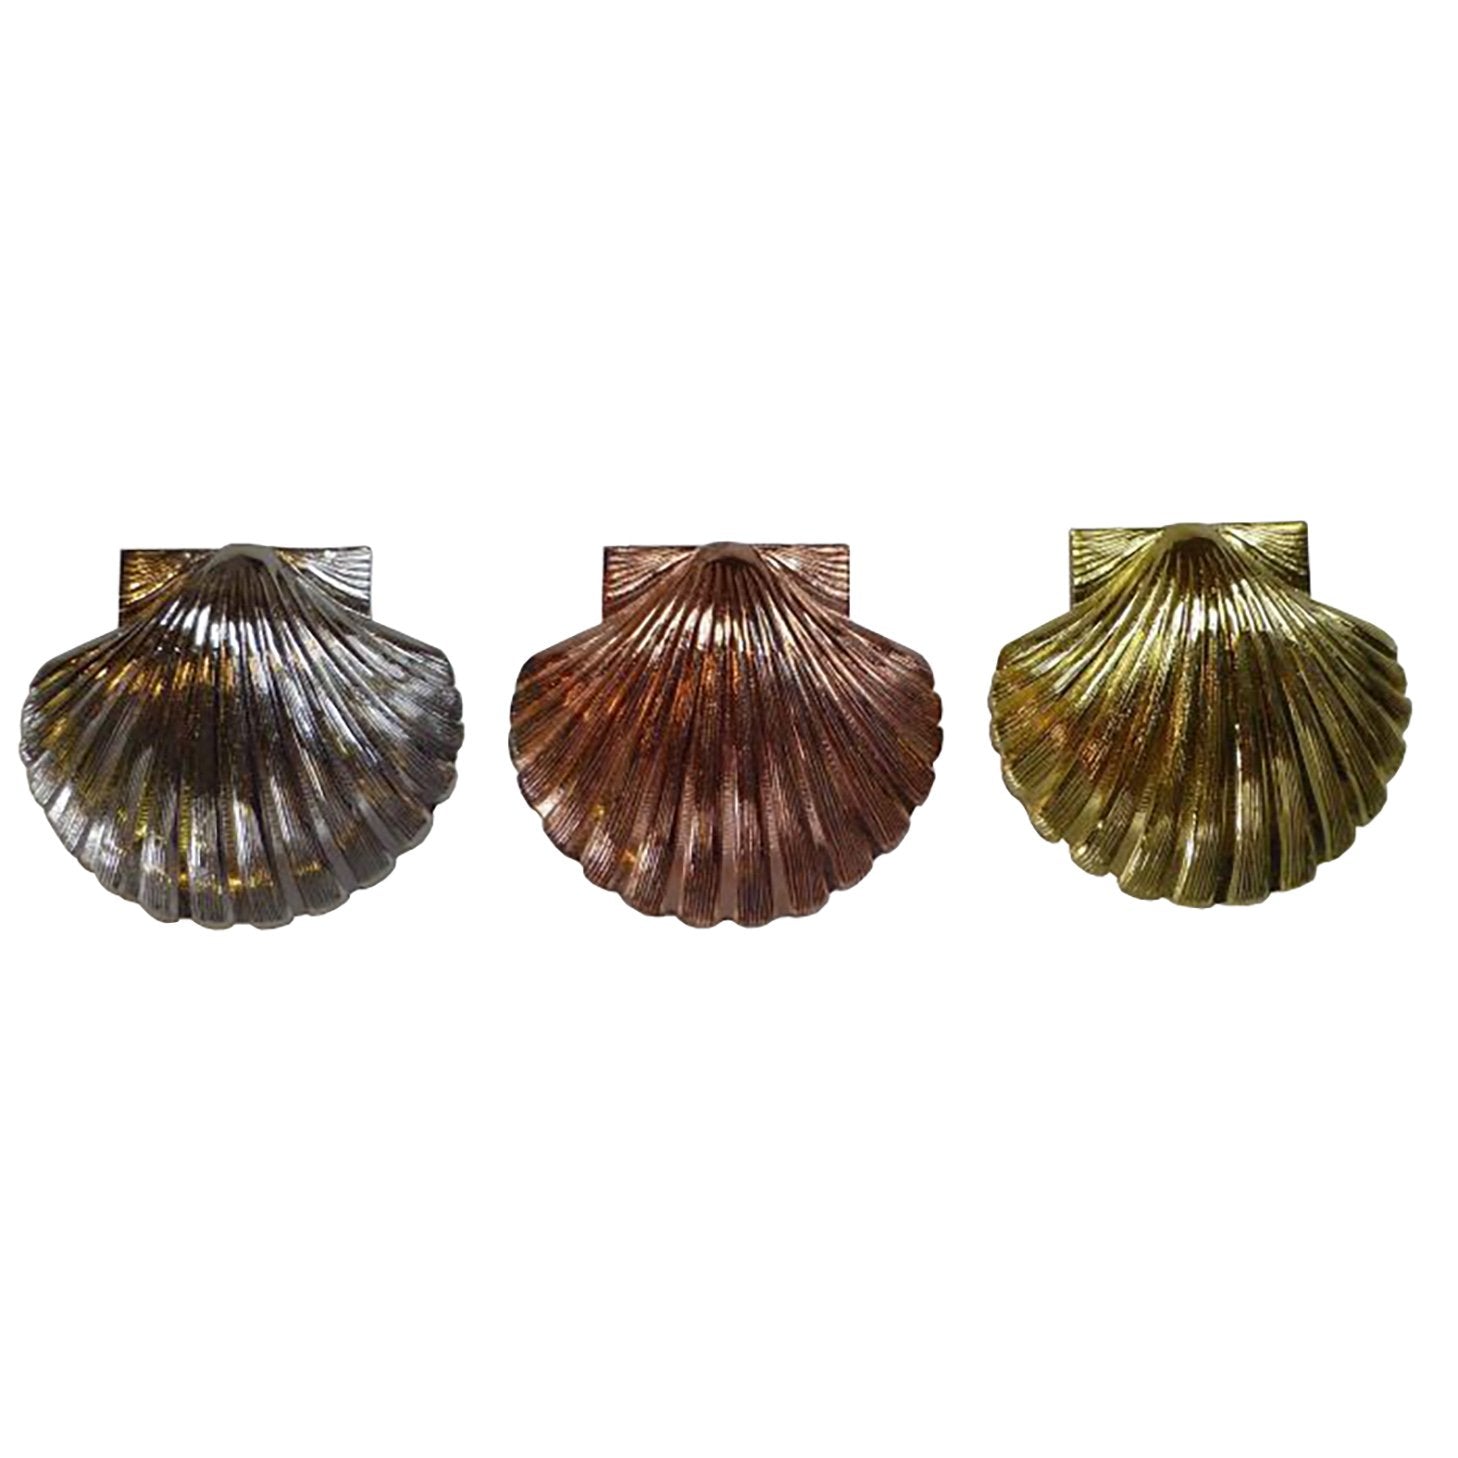 St. Thomas of Acon Shells - Different Sizes and Colors - Bricks Masons